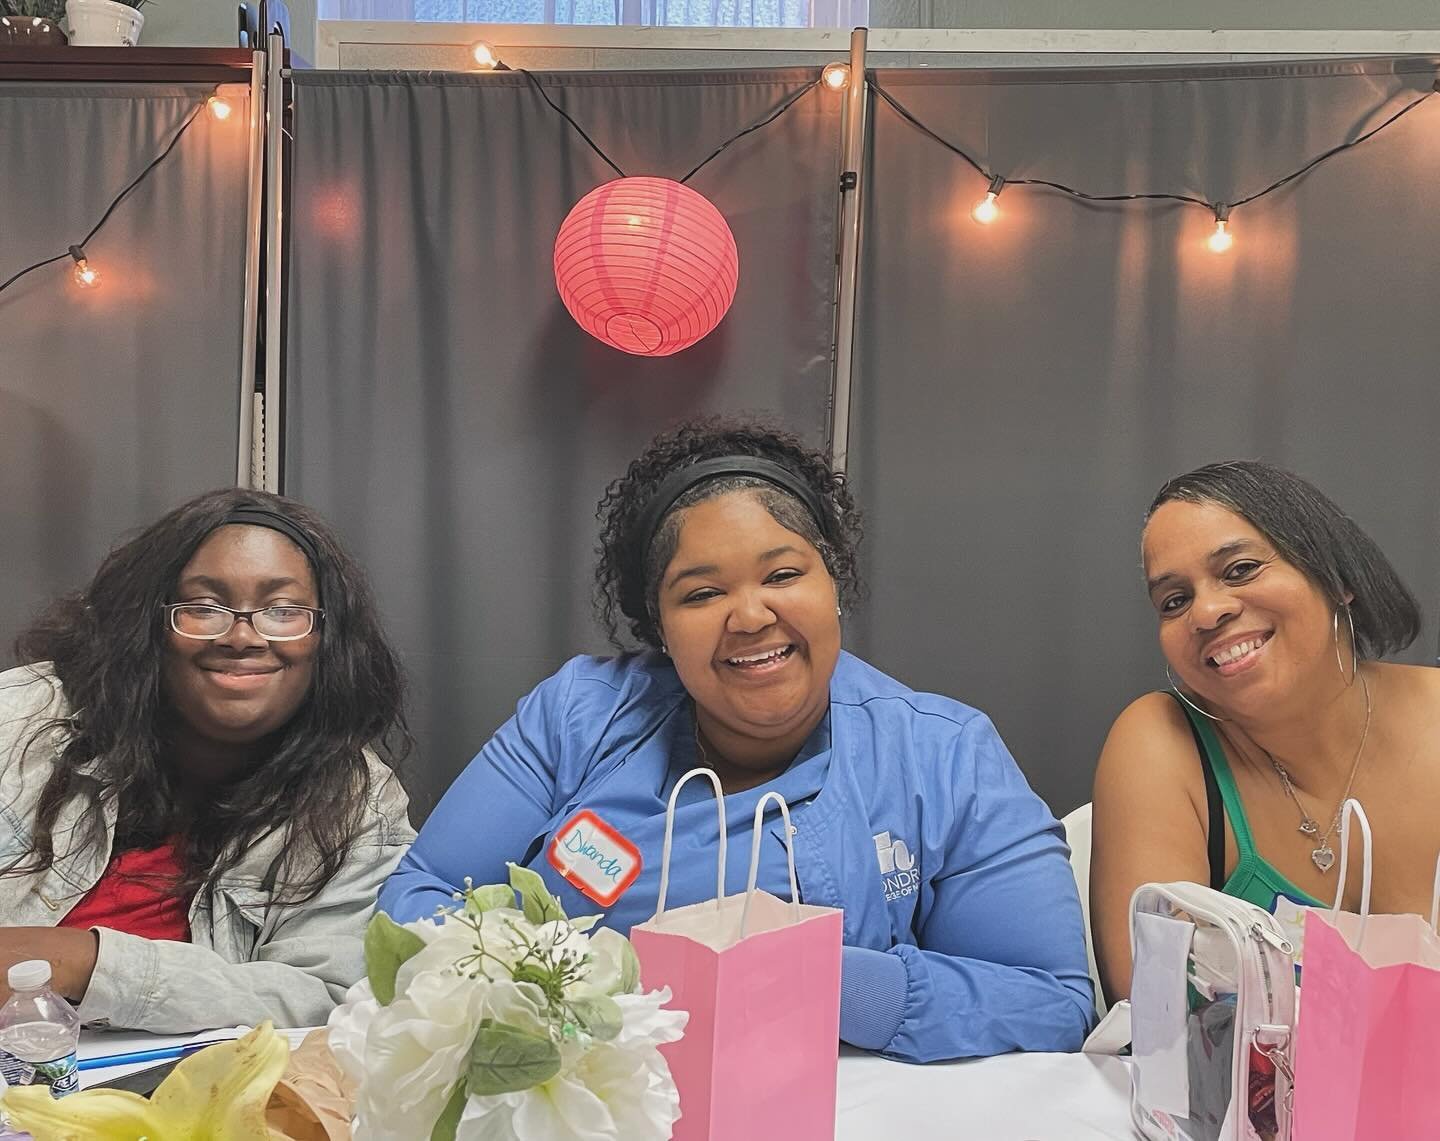 💐 &ldquo;In motherhood, community is so important wherever you can get it, whatever the people look like.&rdquo; -Nefertiti Austin. 💐 Happy Mother&rsquo;s Day to all the MamaStrong moms and volunteers!

Our MamaStrong community believes that no one